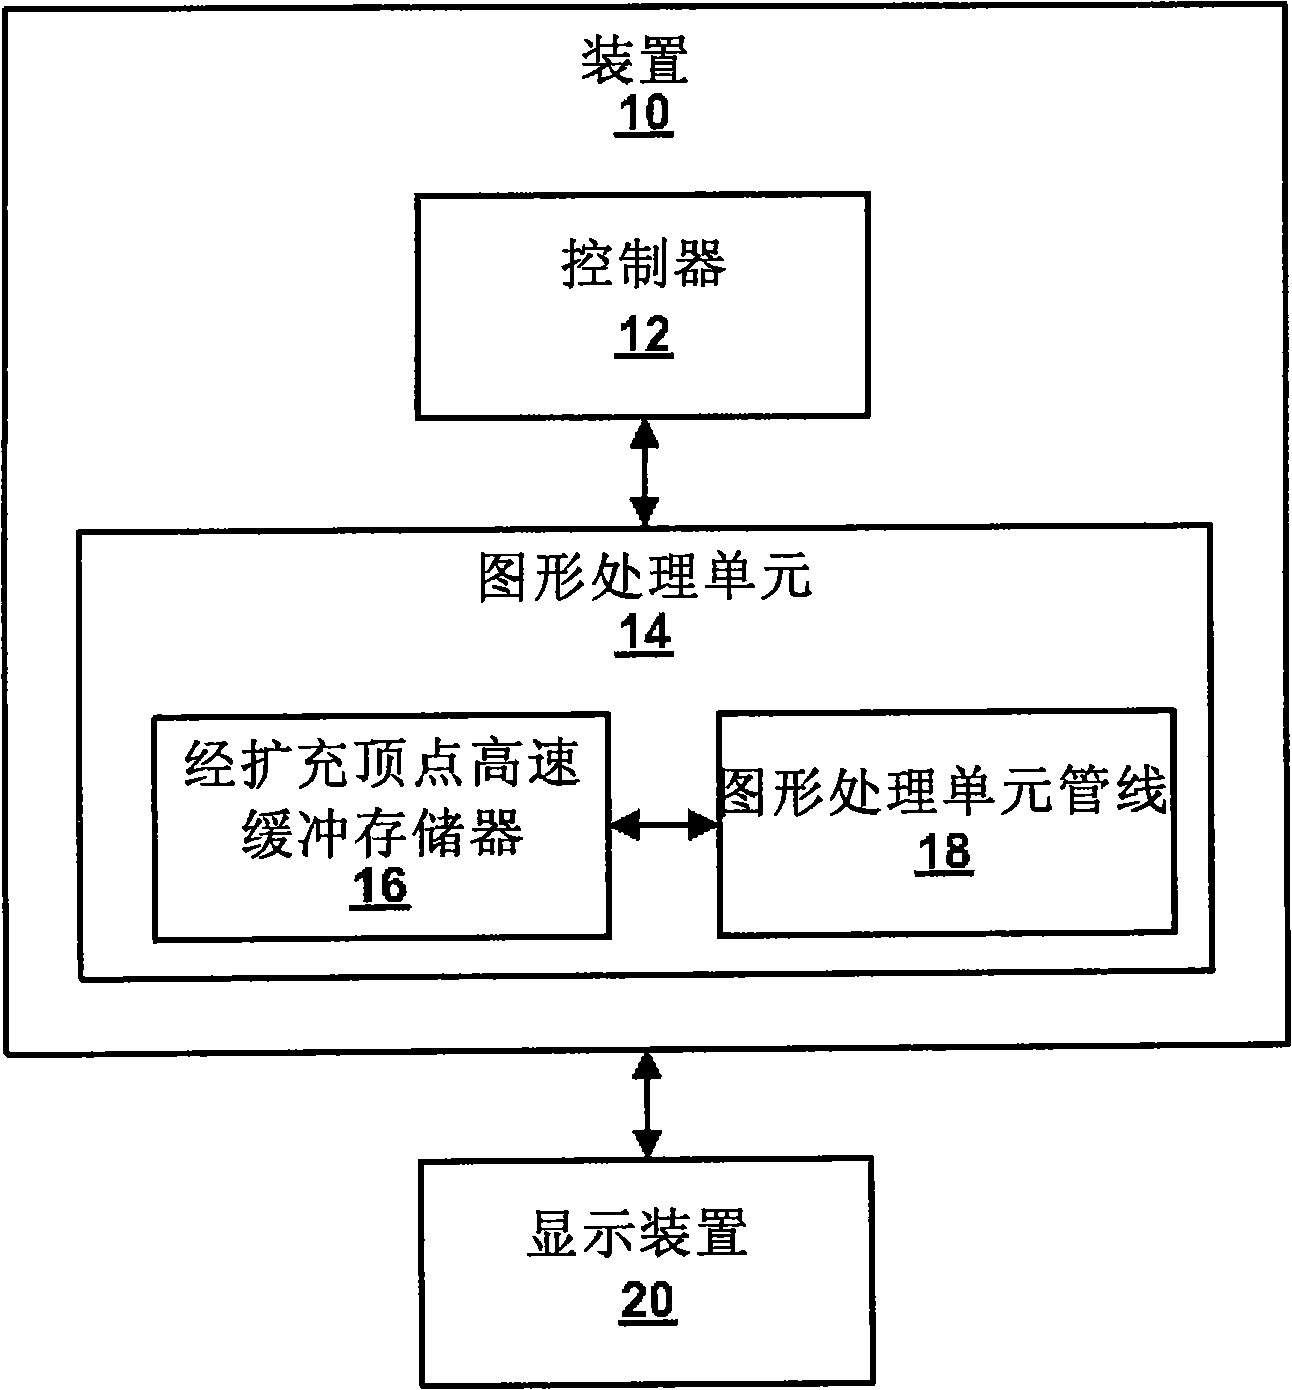 Graphics processing unit with extended vertex cache